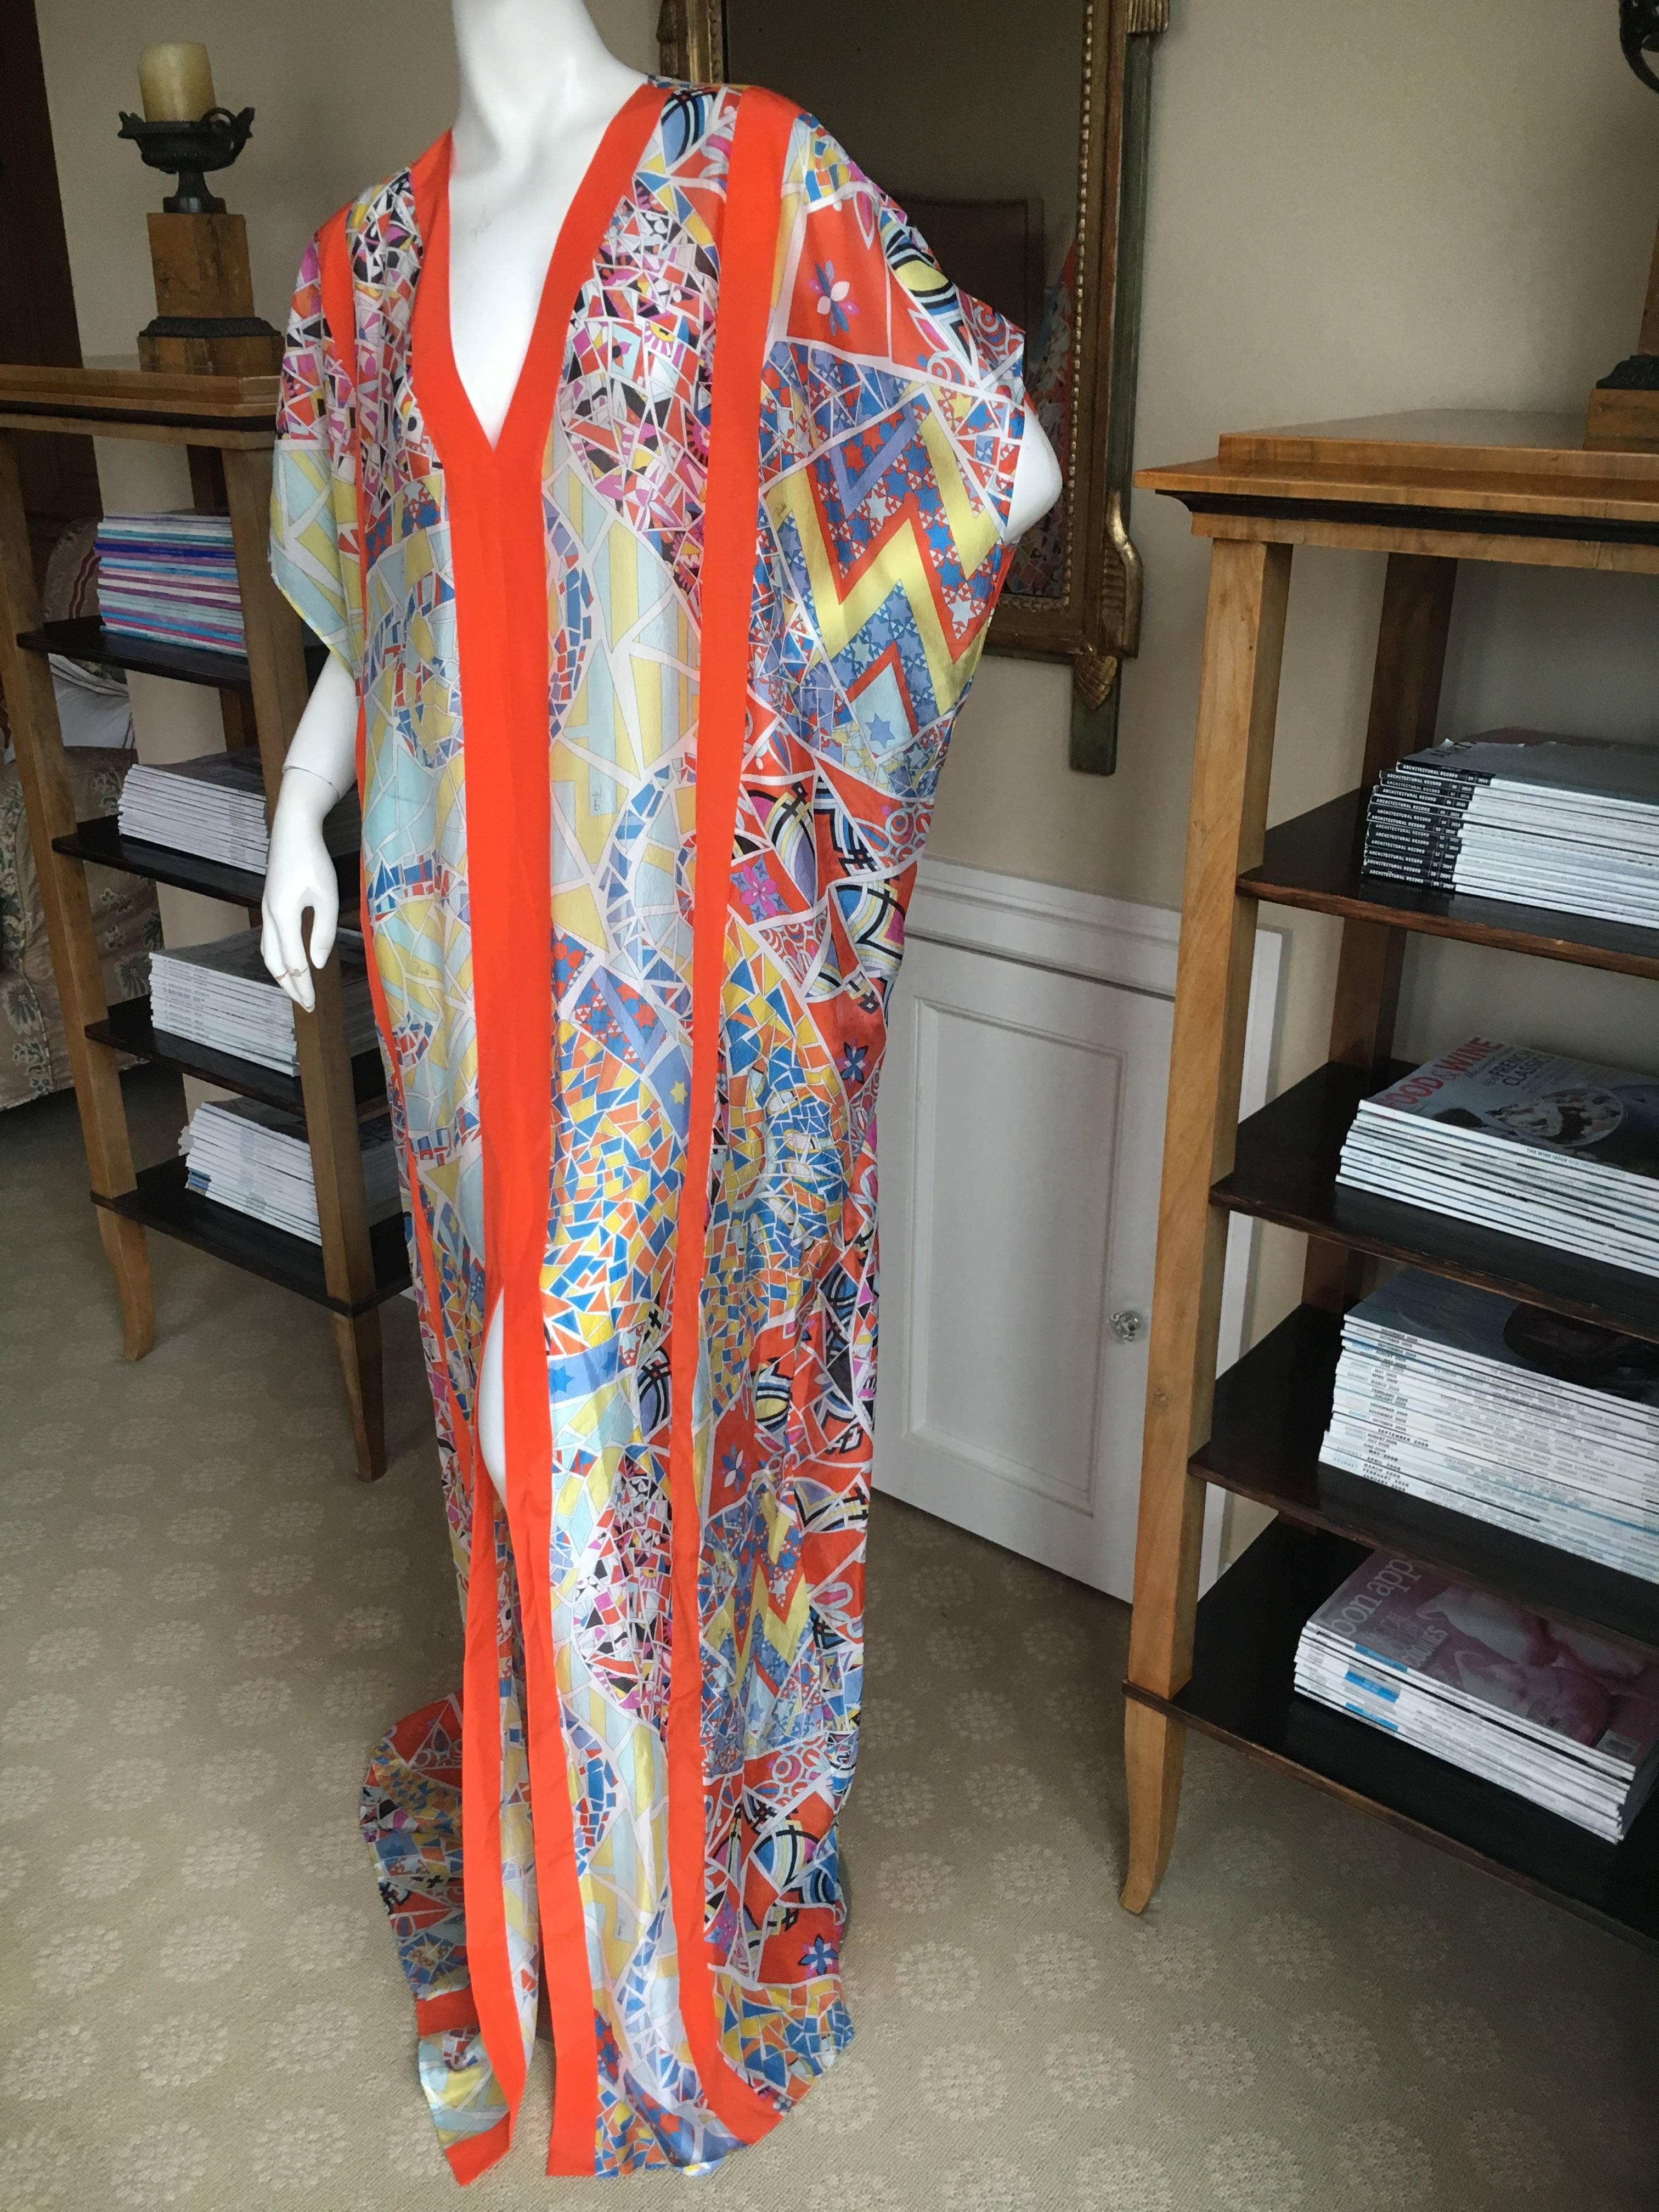 Brilliant kaleidoscope pattern sheer silk caftan from Emilio Pucci.
This is a large size with a very long 70+ hemline
Bust 66"
Waist 56"
Length 70"
New with tags